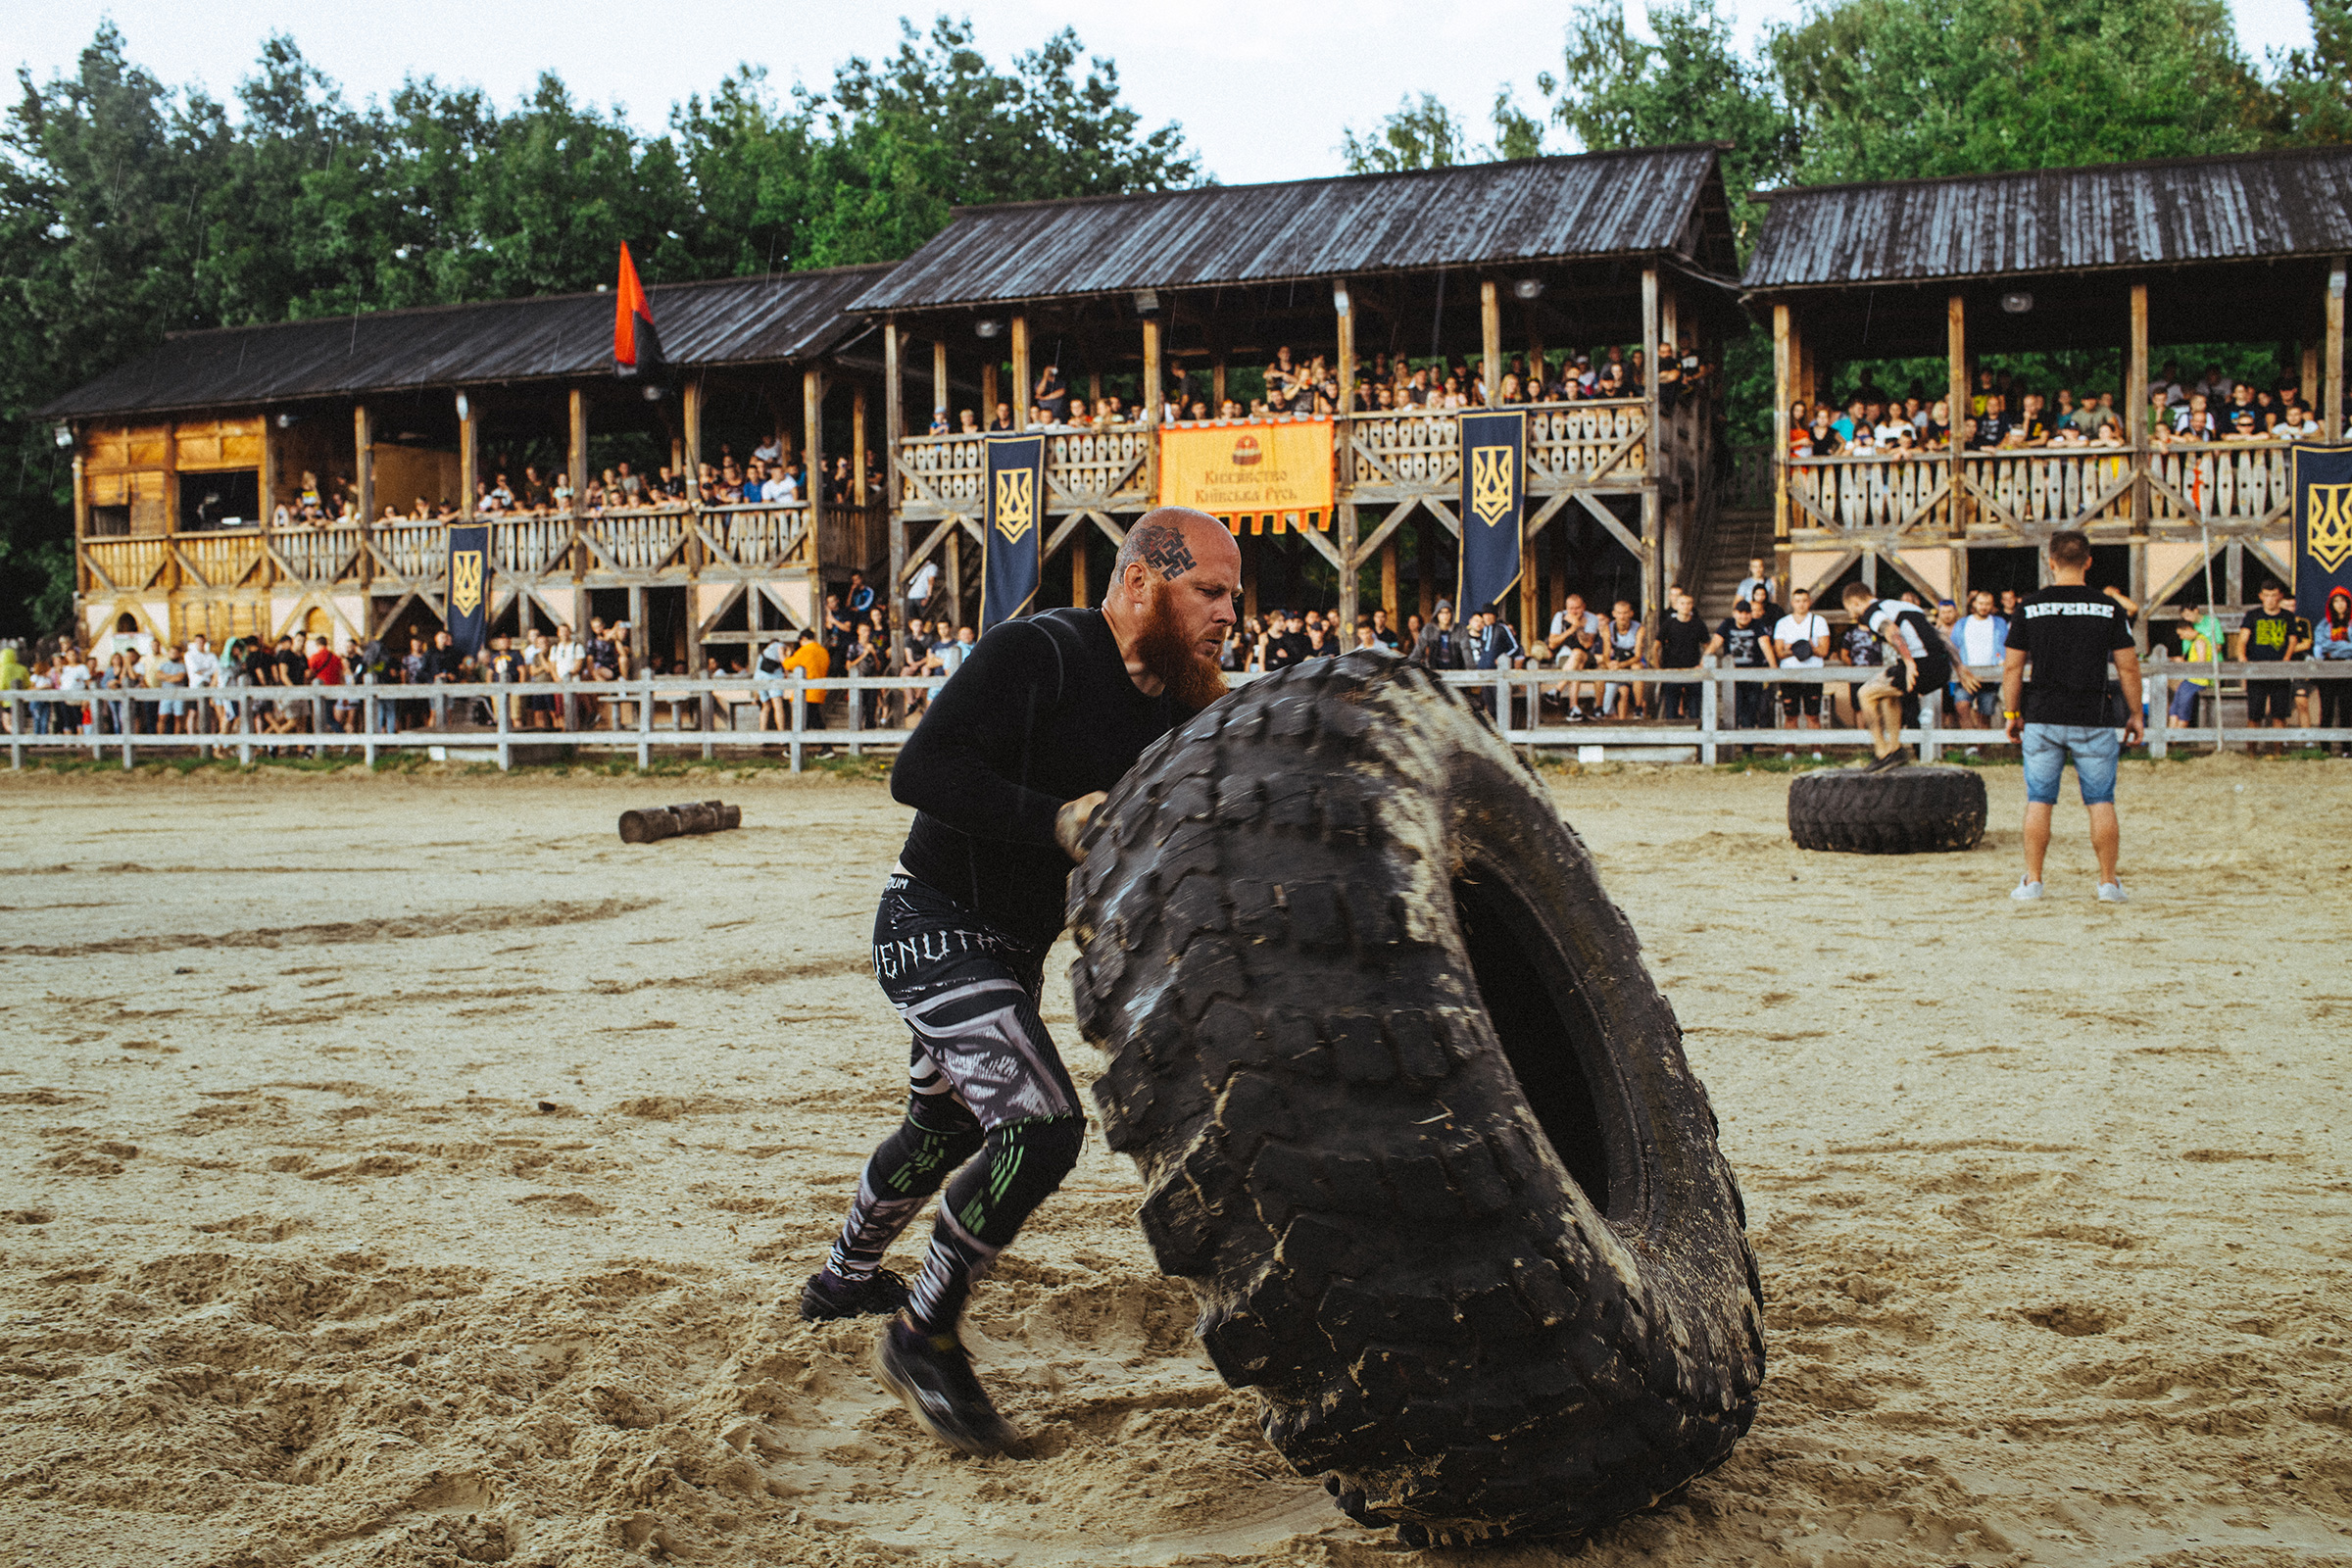 The event included mixed martial arts and endurance competitions, as well as a series of public lectures on the movement’s extreme right-wing ideology. (Maxim Dondyuk for TIME)